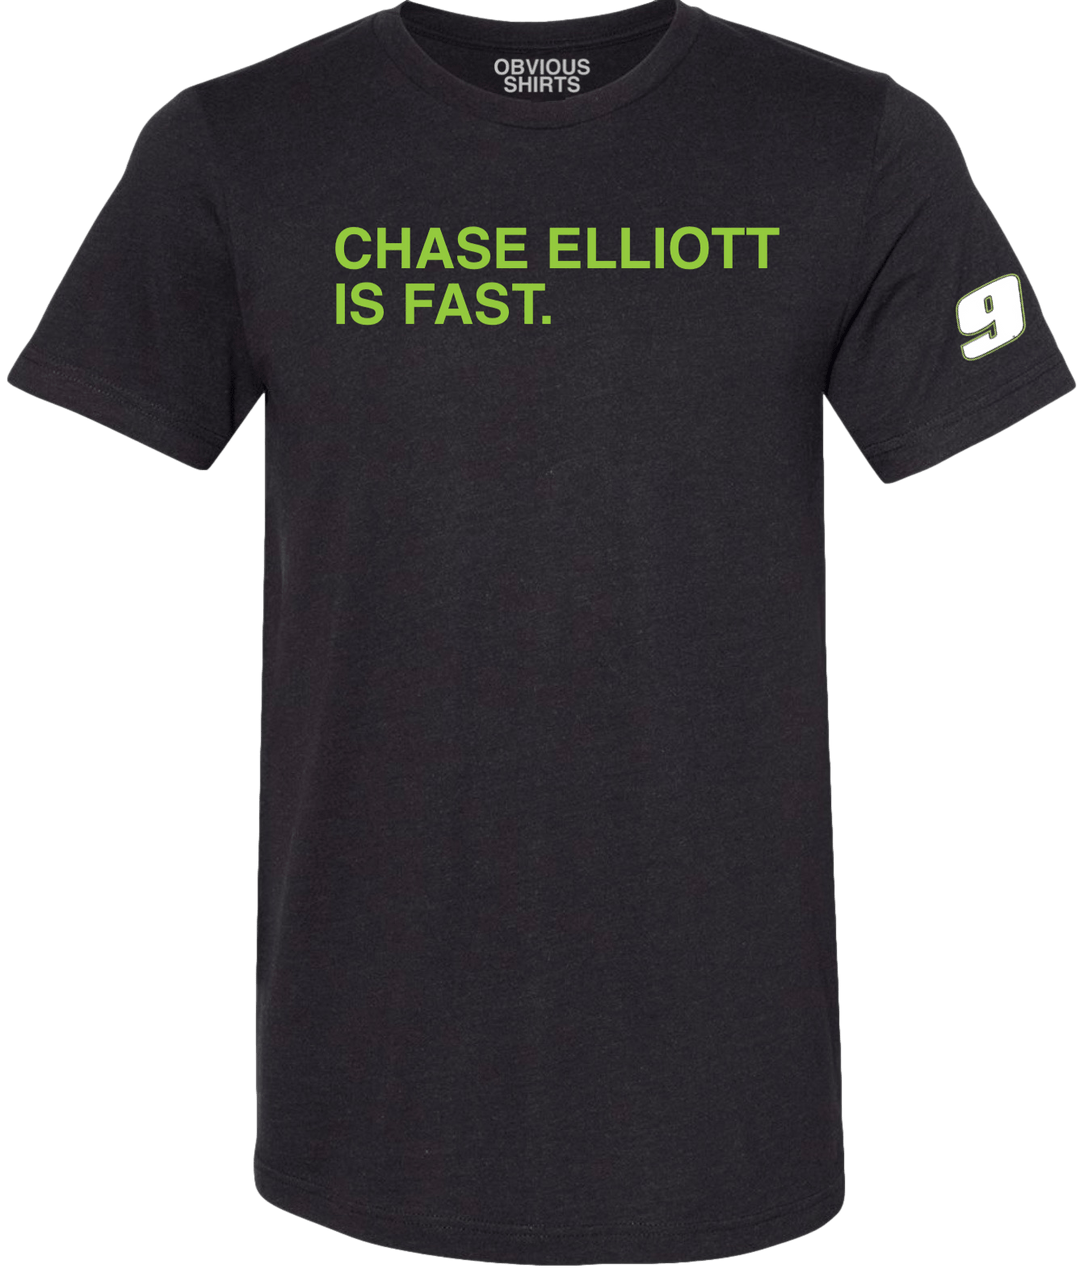 CHASE ELLIOTT IS FAST. - OBVIOUS SHIRTS